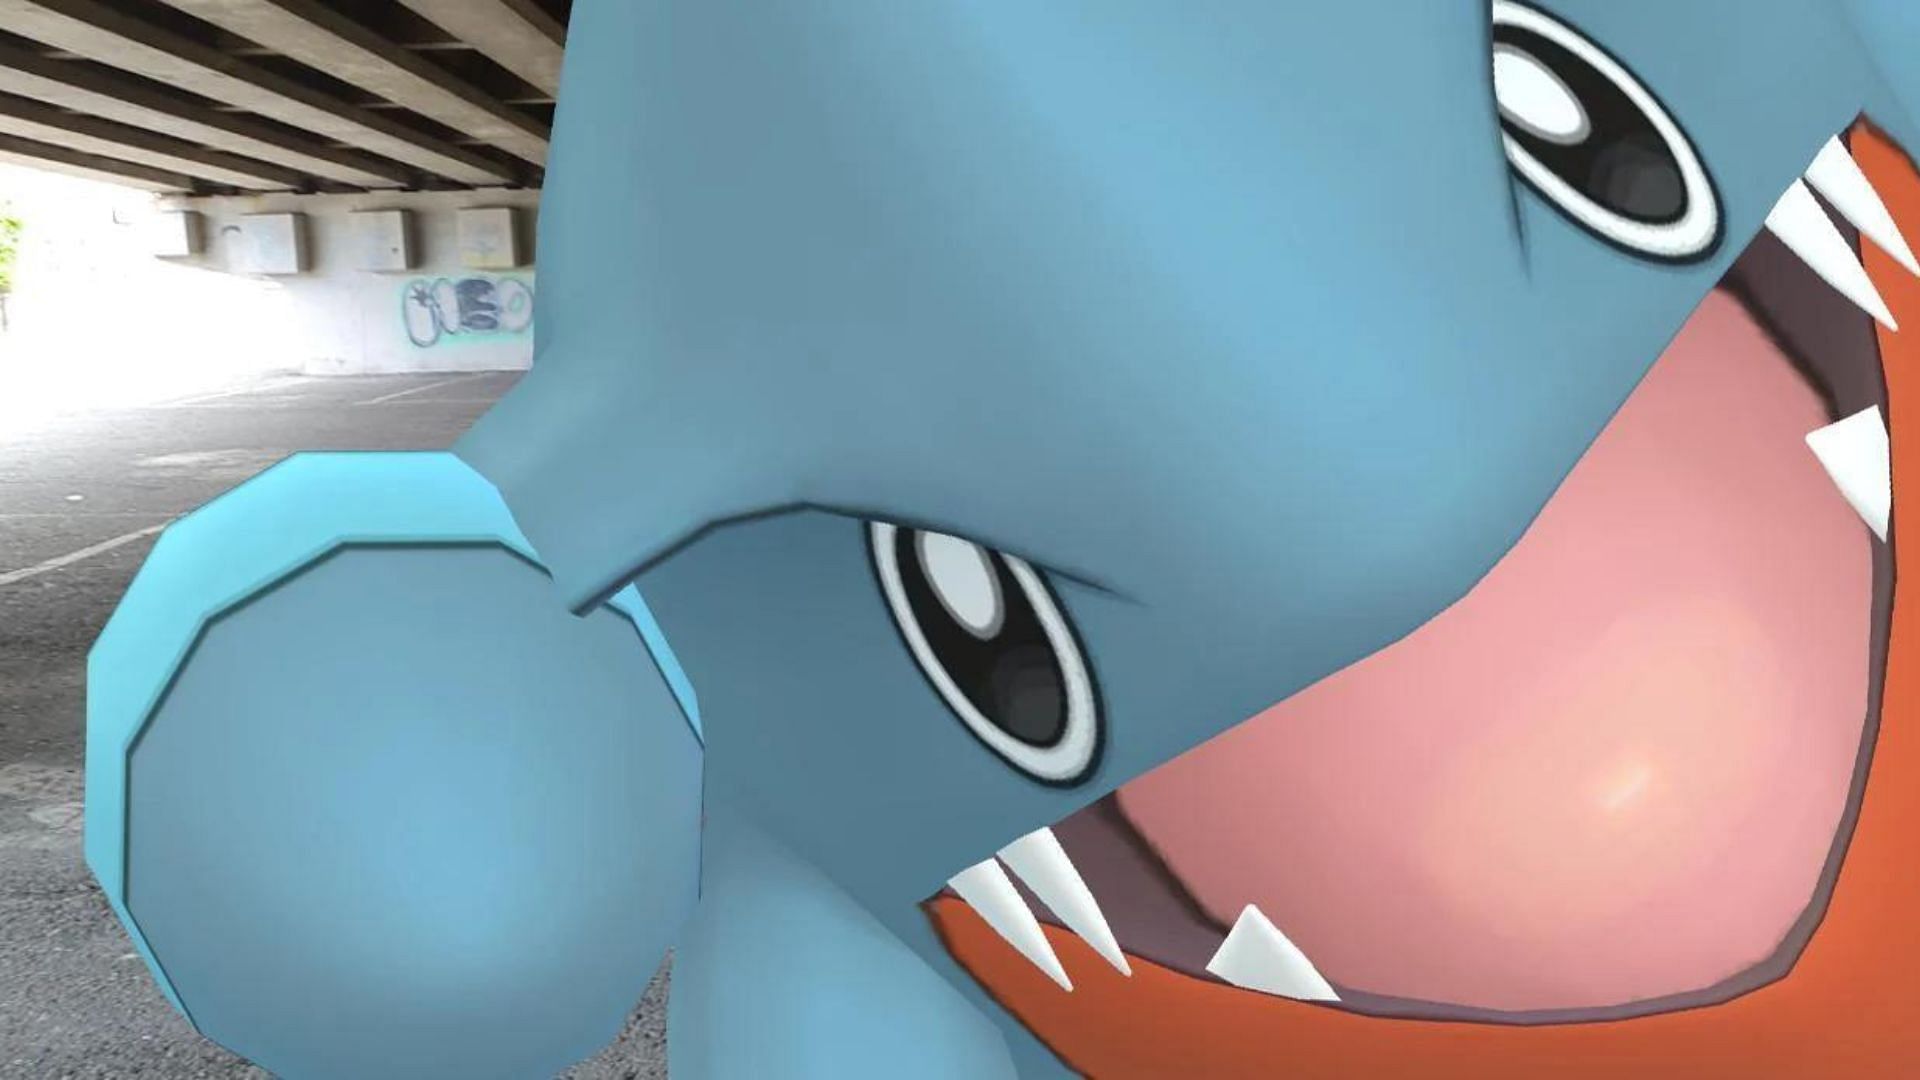 Gible as it appears when photobombing (Image via Niantic)